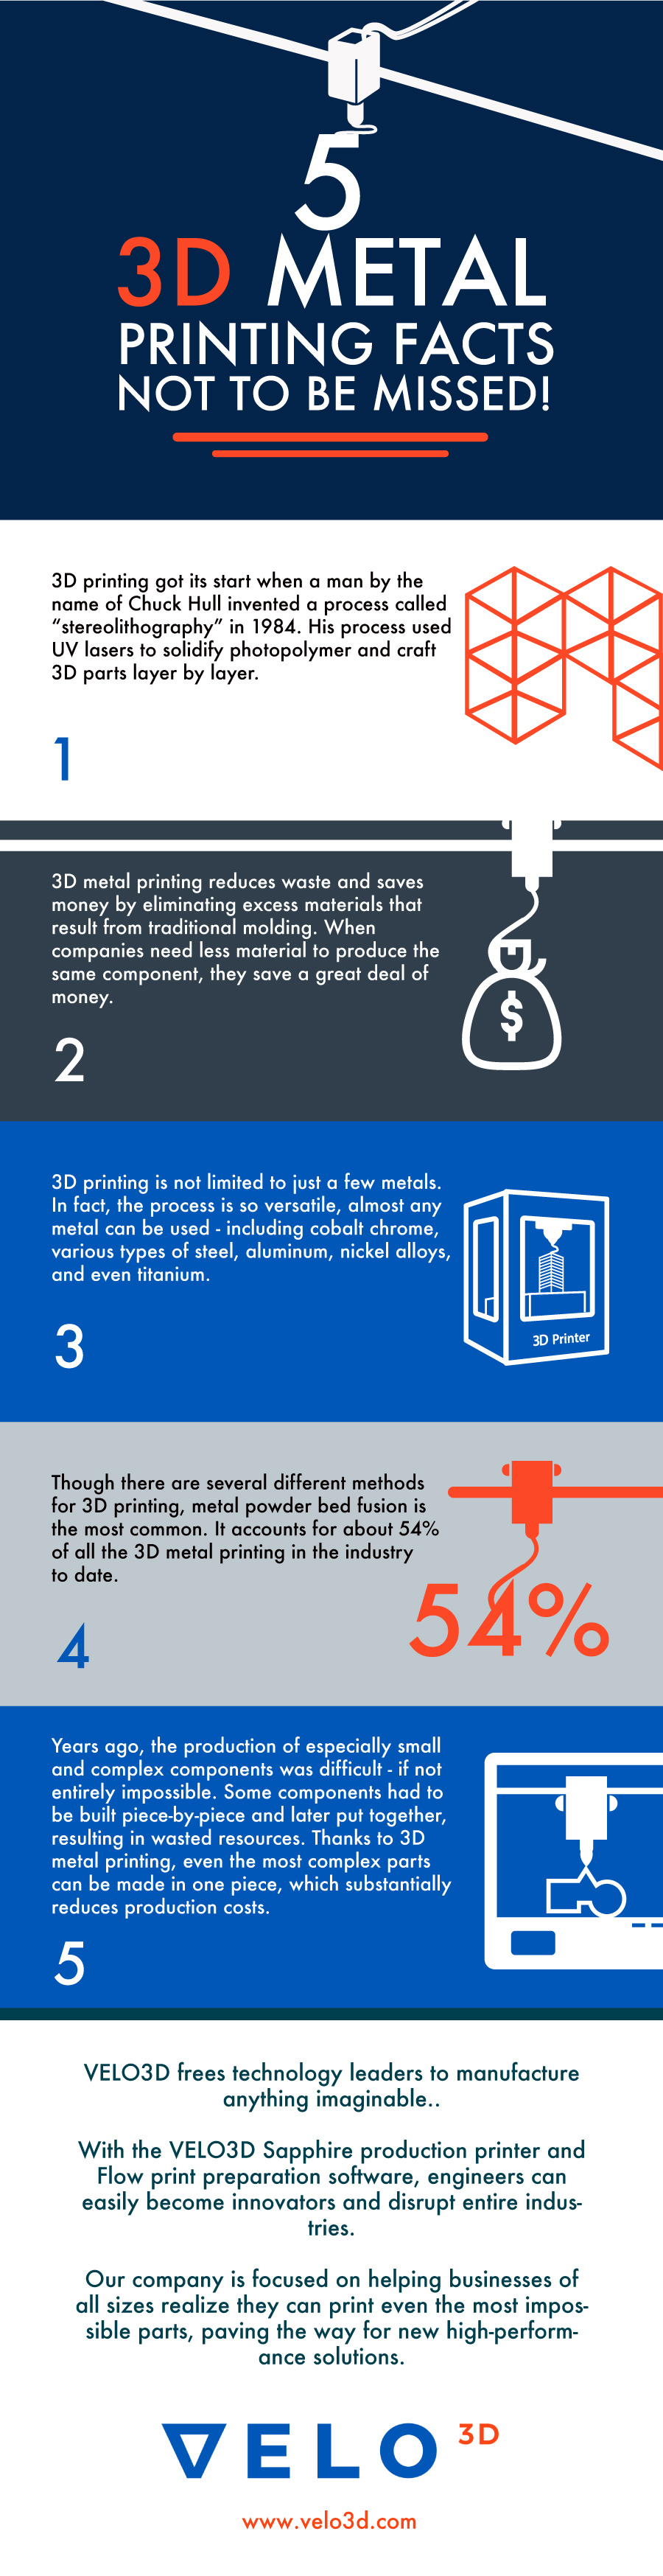 3D Metal Printing Facts Not to Be Missed! [INFOGRAPHIC]